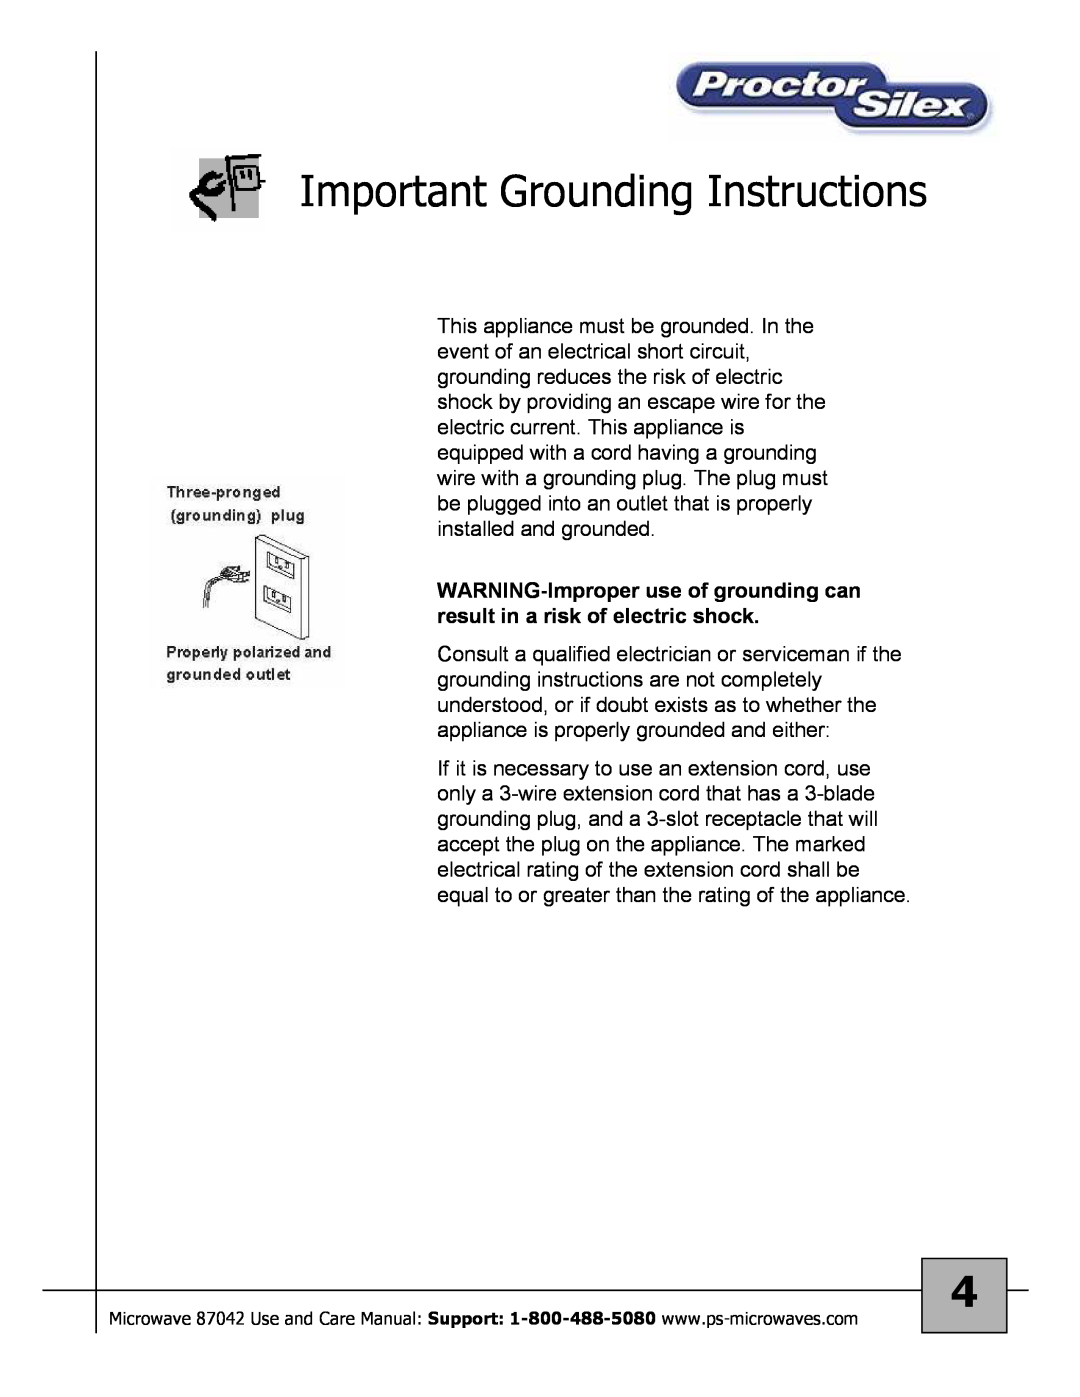 Proctor-Silex 87027 owner manual Important Grounding Instructions 